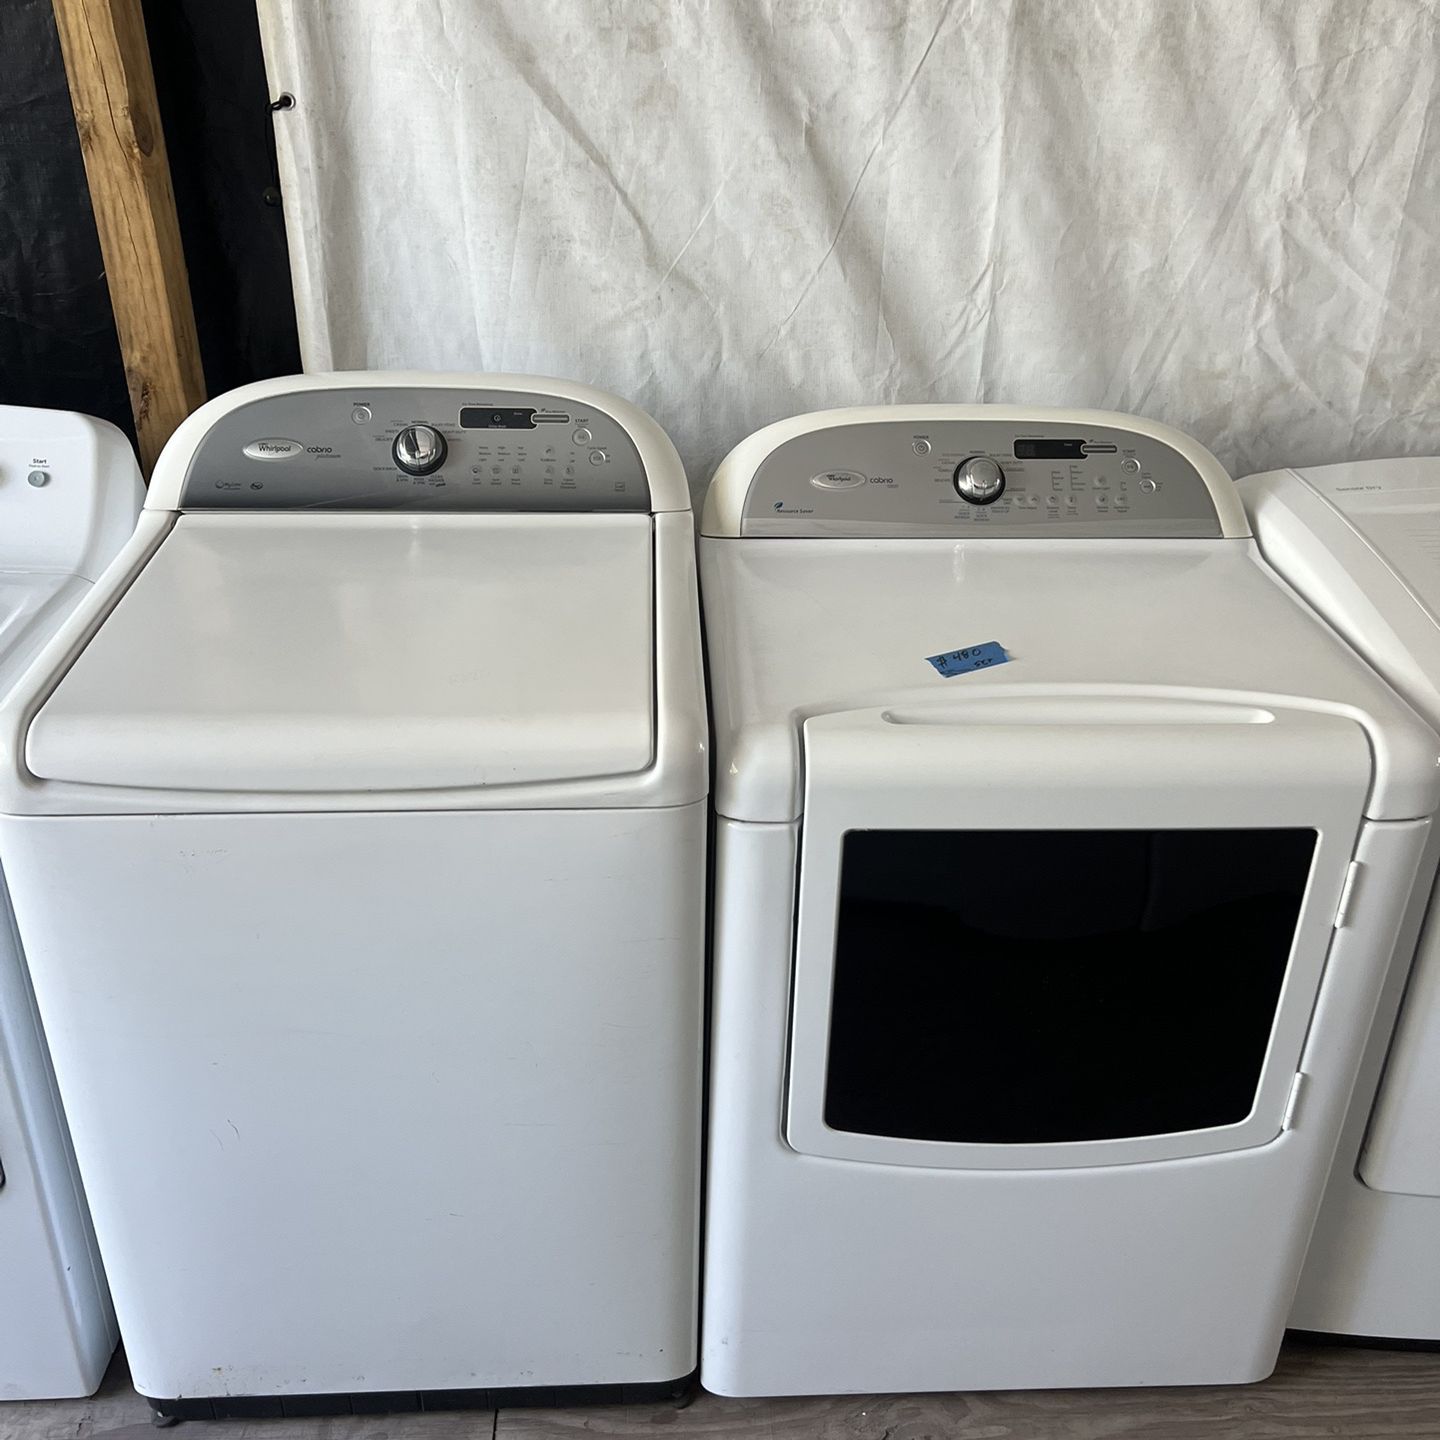 Whirlpool Washer&dryer Large Capacity Set   60 day warranty/ Located at:📍5415 Carmack Rd Tampa Fl 33610📍 